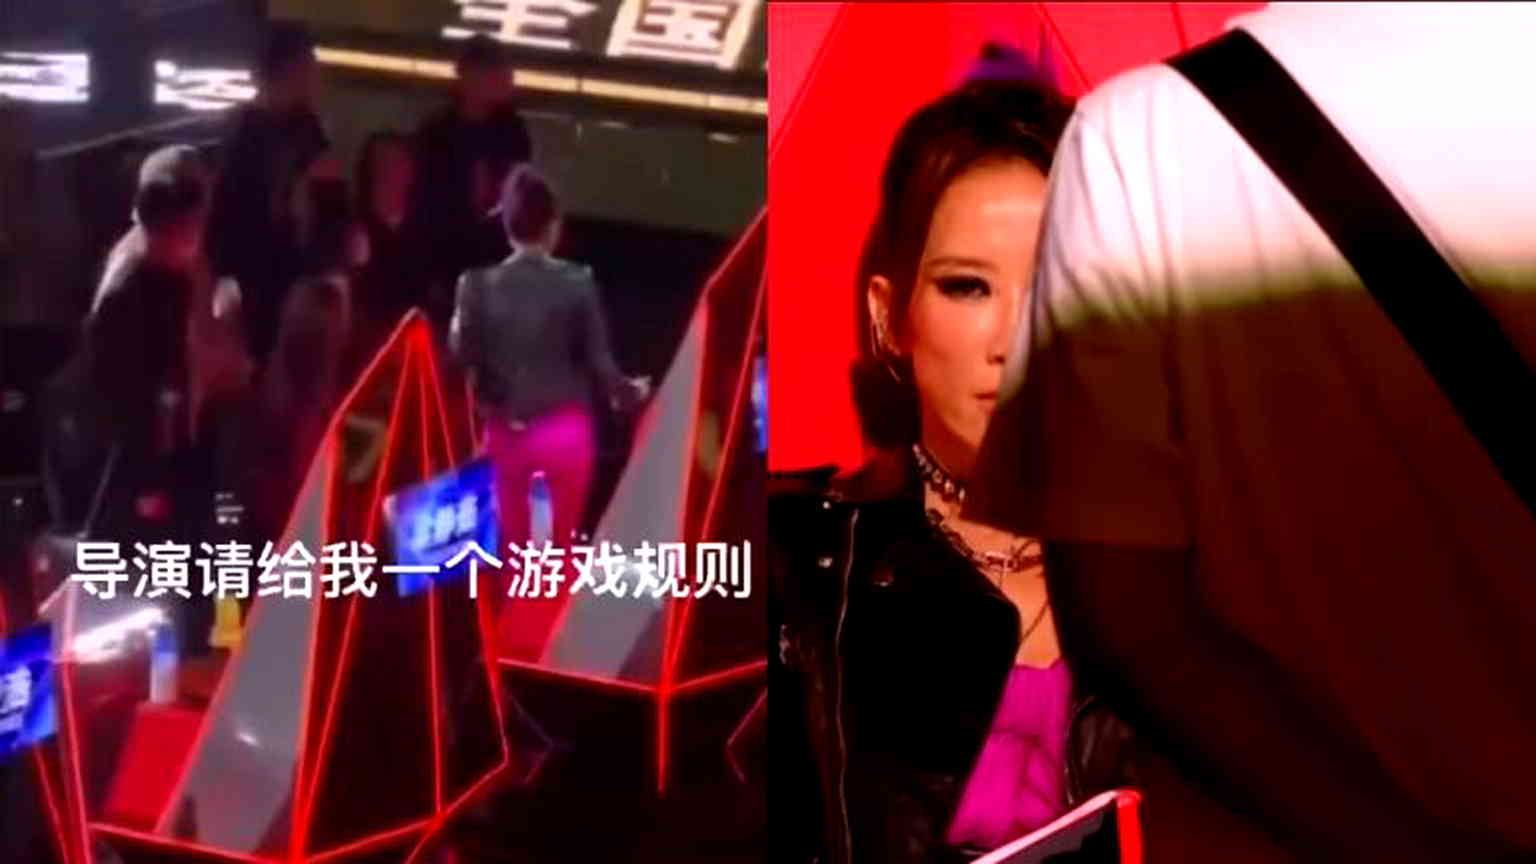 ‘The Voice of China’ faces backlash after late star Coco Lee’s recorded accusations leak